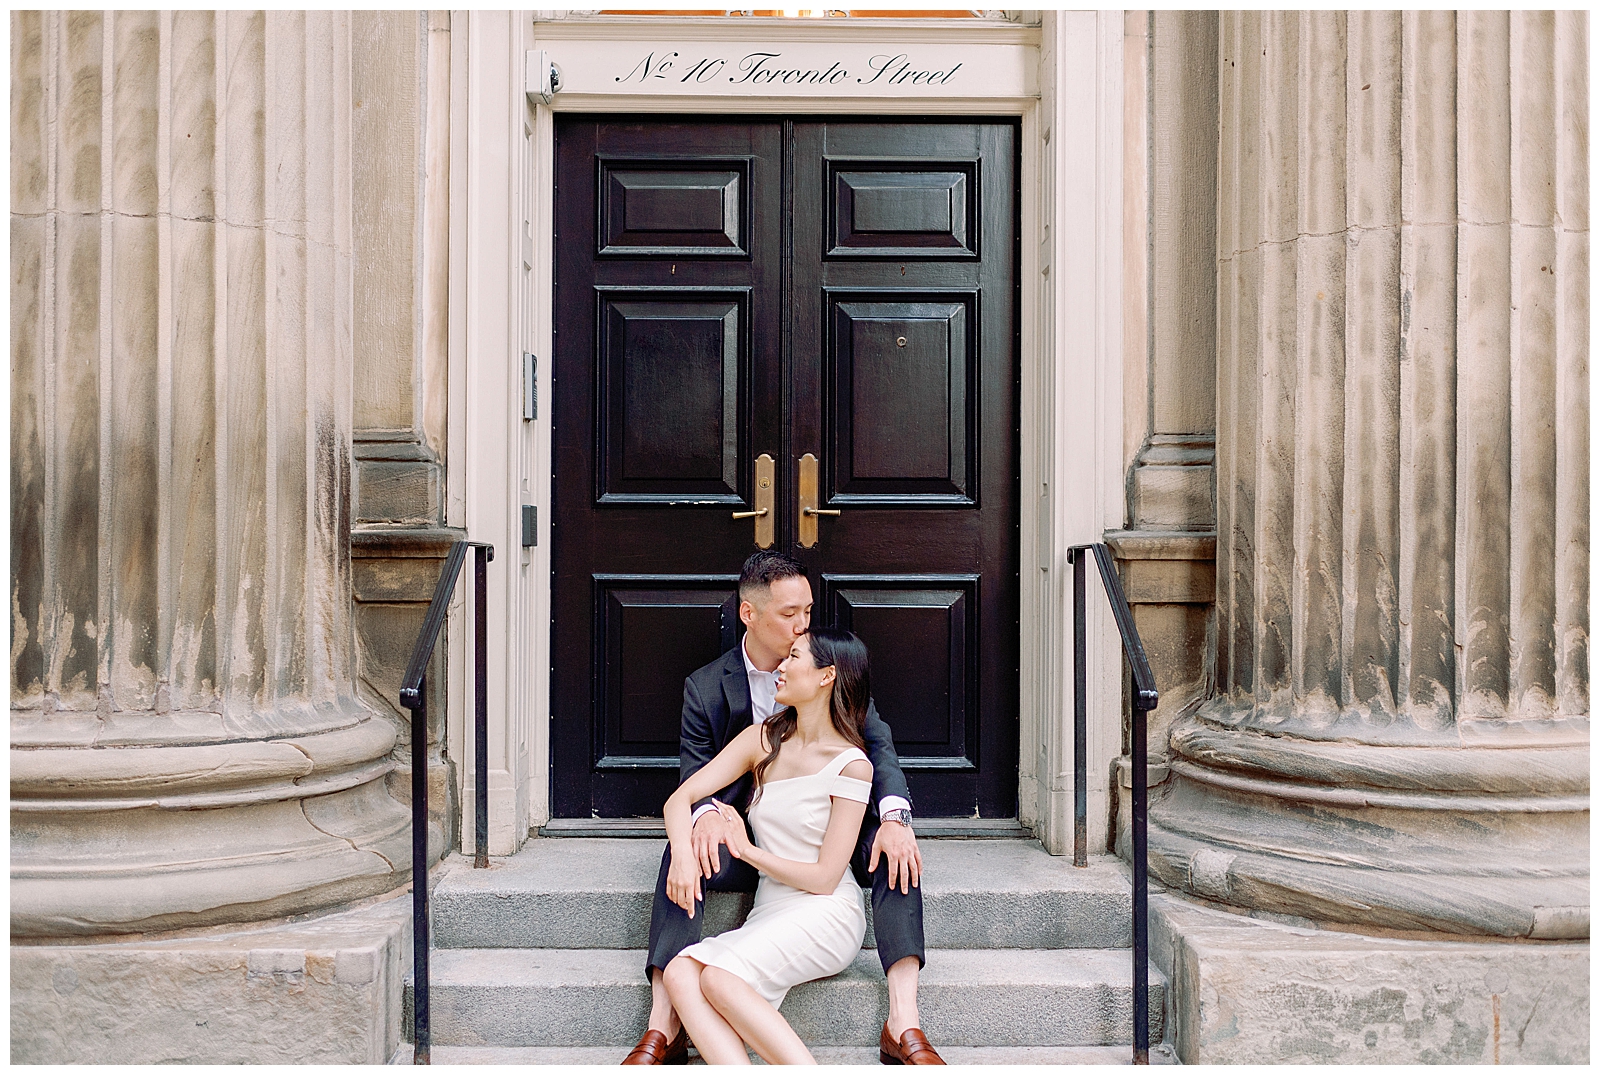 Downtown Toronto Financial District Engagement Session Modern Editorial Timeless Couple Sitting Elegantly in Front of Beautiful Door | Toronto Wedding Photography Jacqueline James Photography